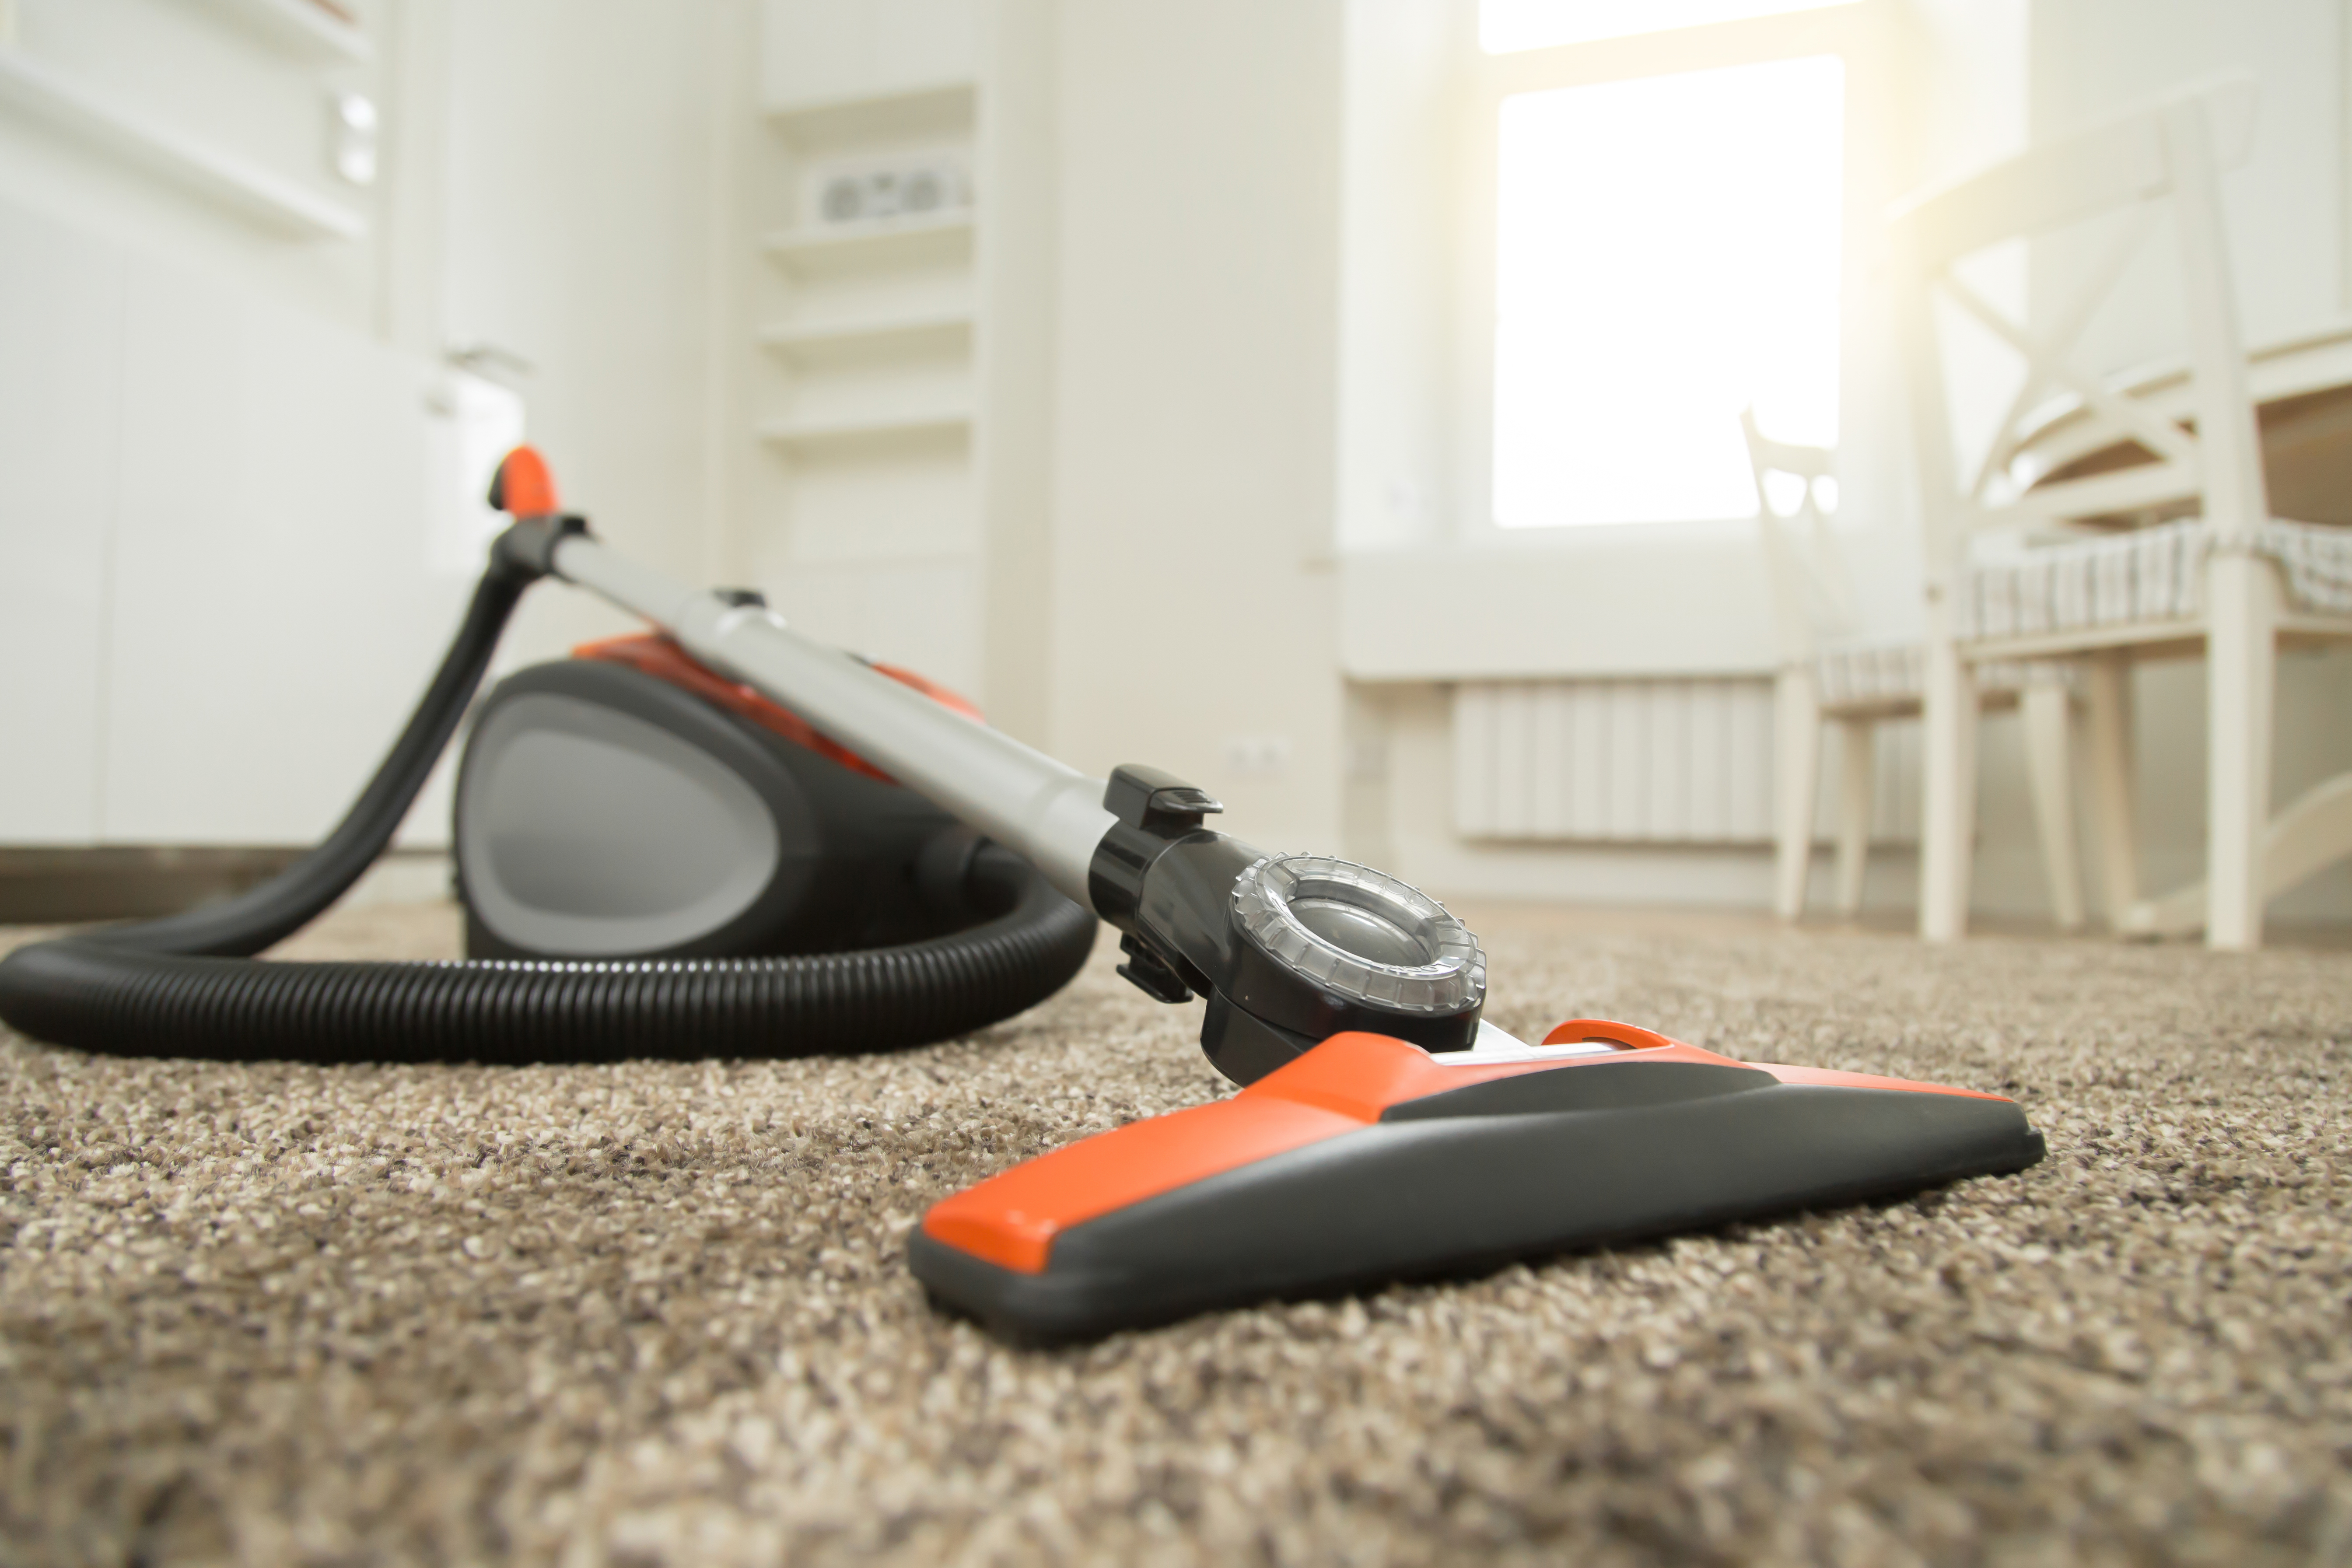 Commercial Carpet Cleaning Service in San Diego with astounding results